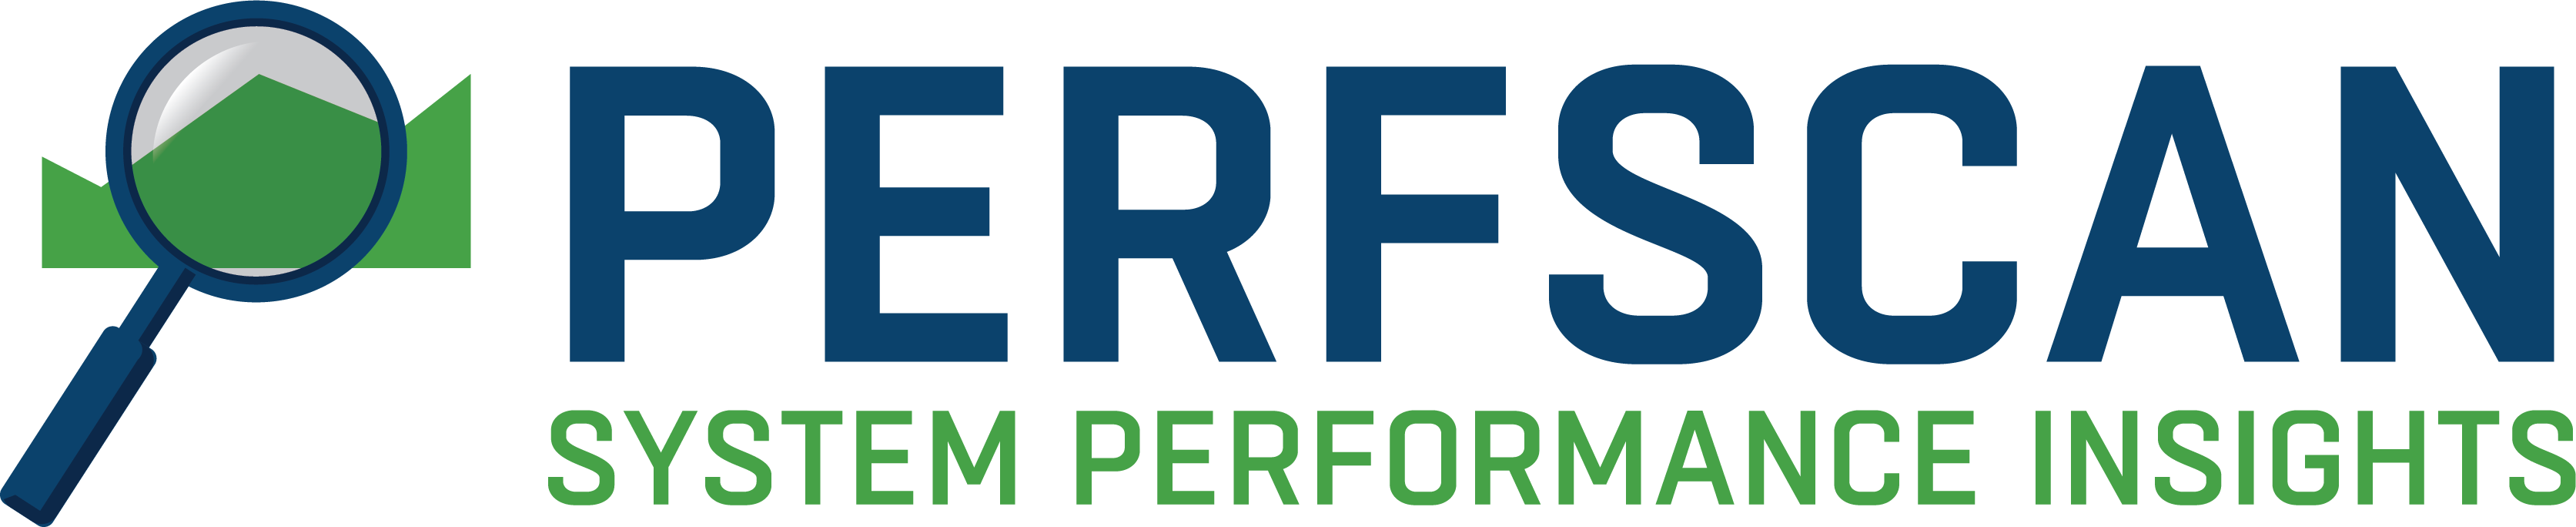 Perfscan Performance Management Tool